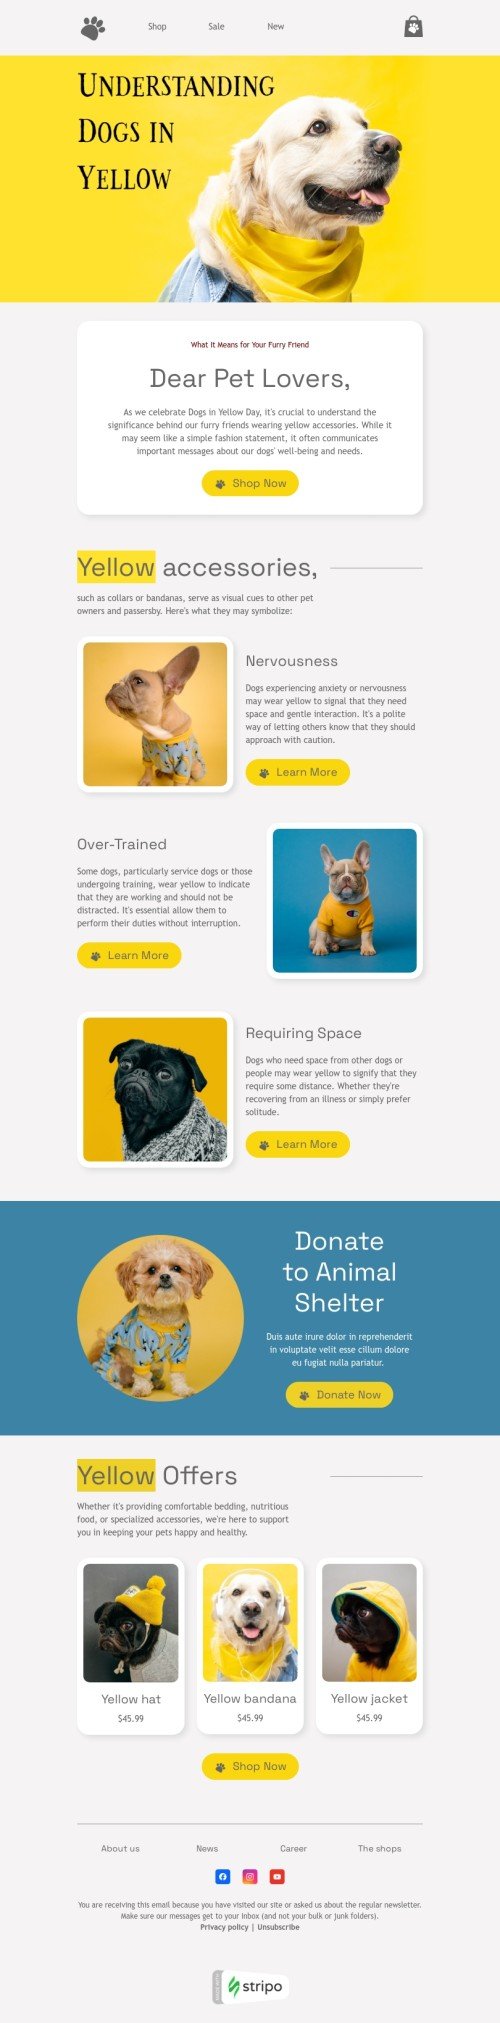 Dogs in Yellow Day email template "Understanding dogs in yellow" for pets industry mobile view